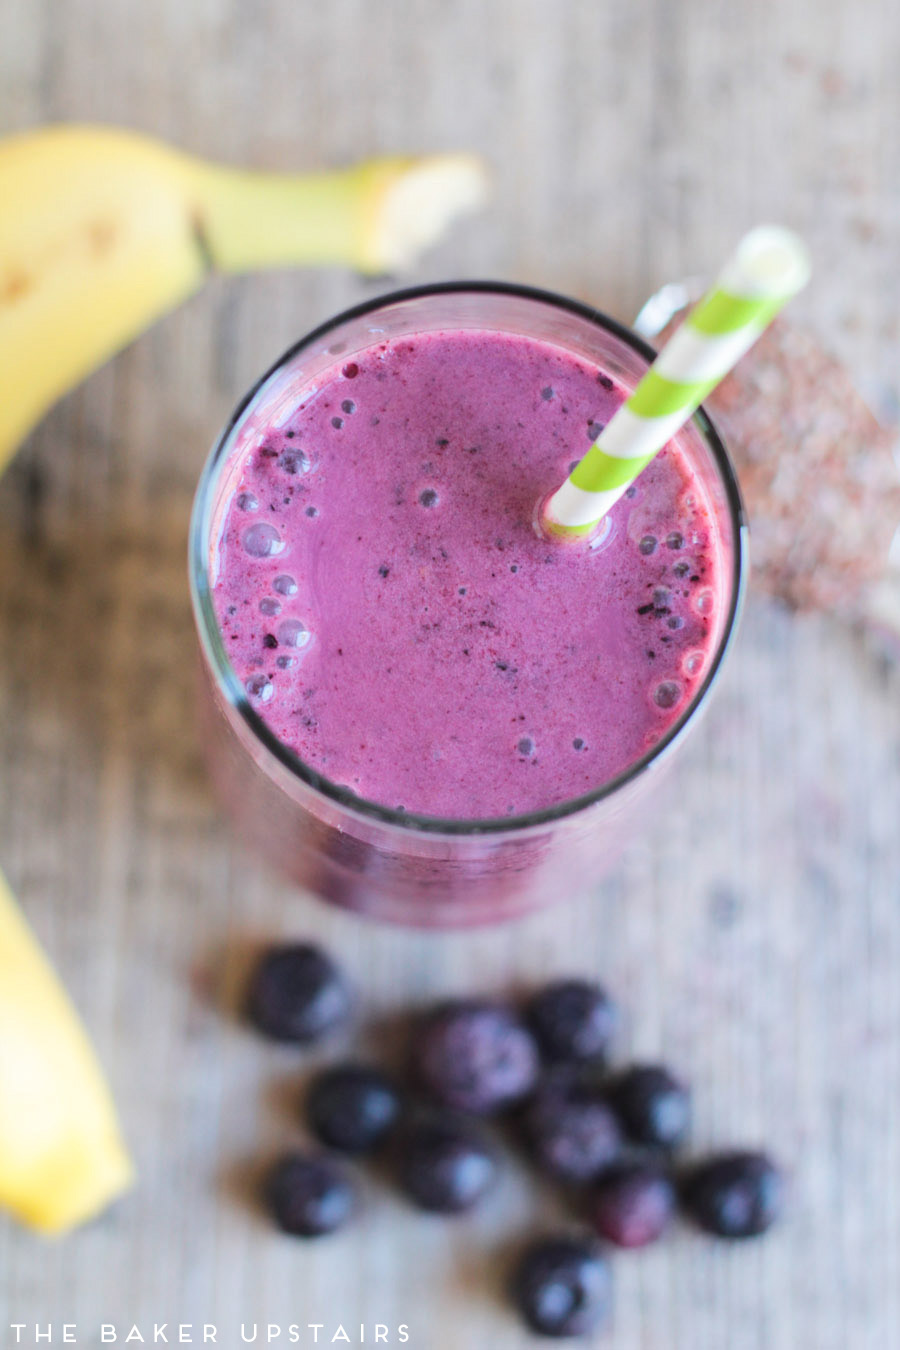 Blueberry pomegranate smoothie - so sweet, tangy, and flavorful! 